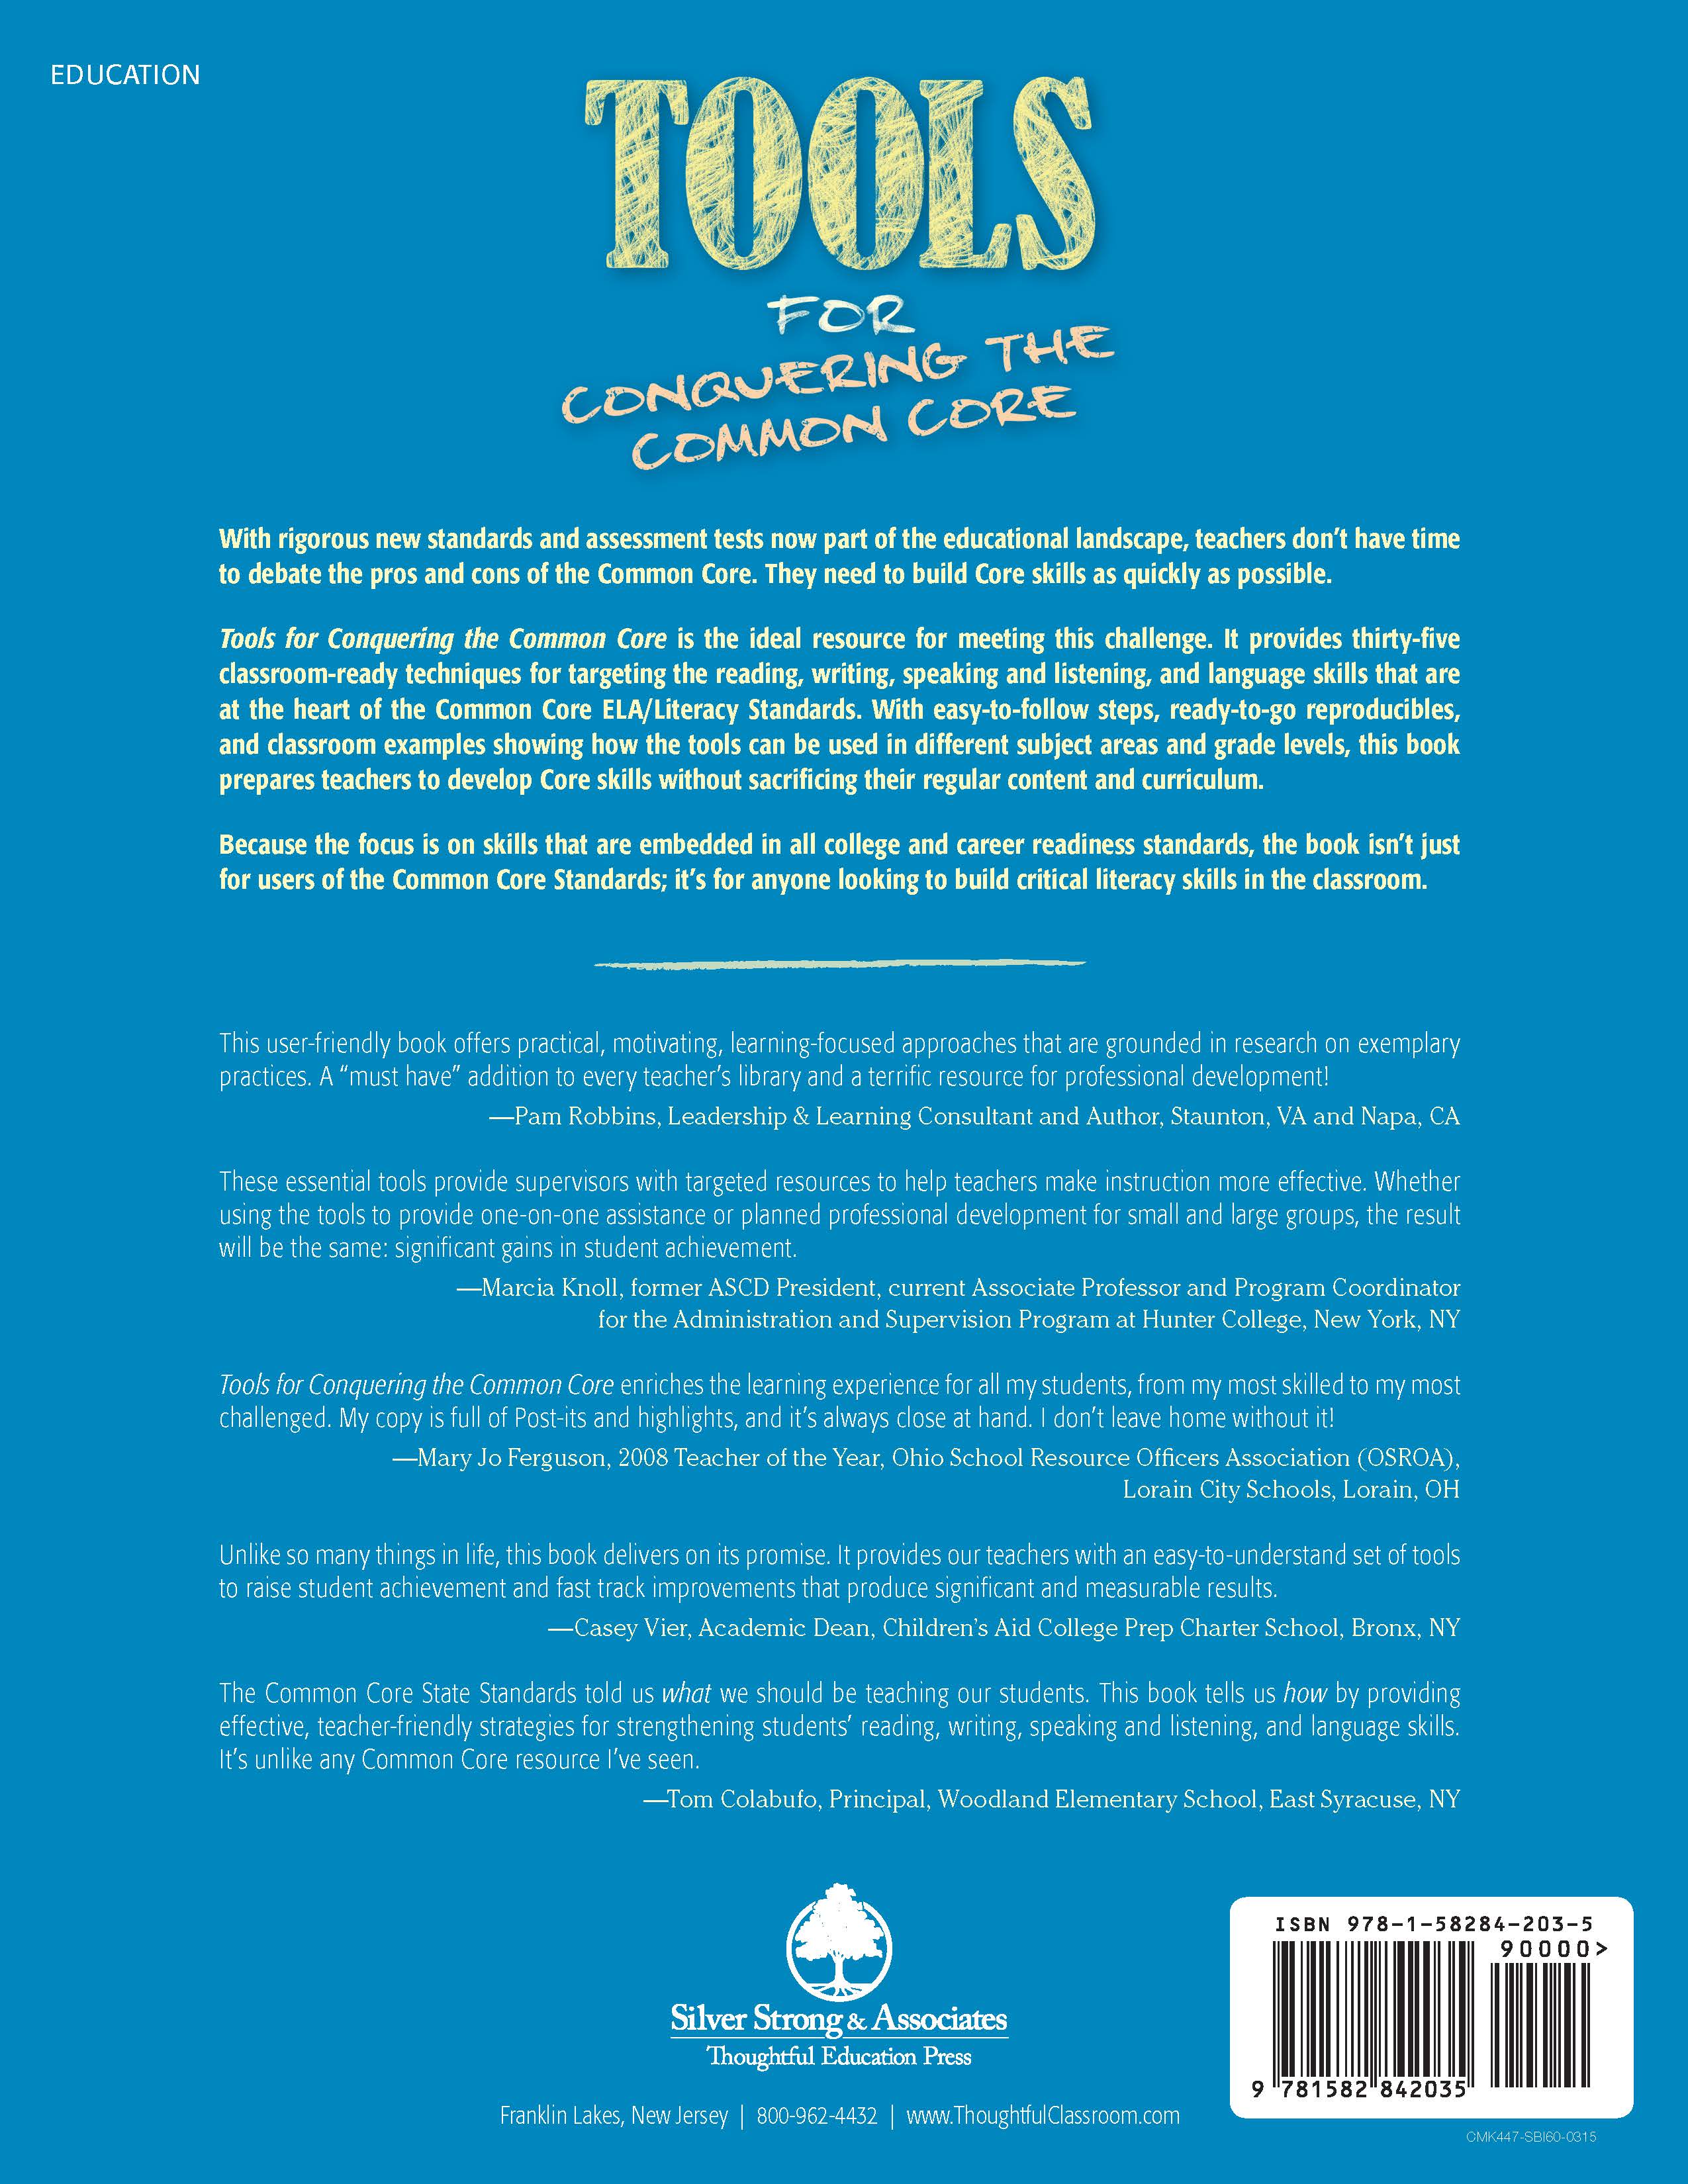 Tools for Conquering the Common Core (back cover & testimonials)